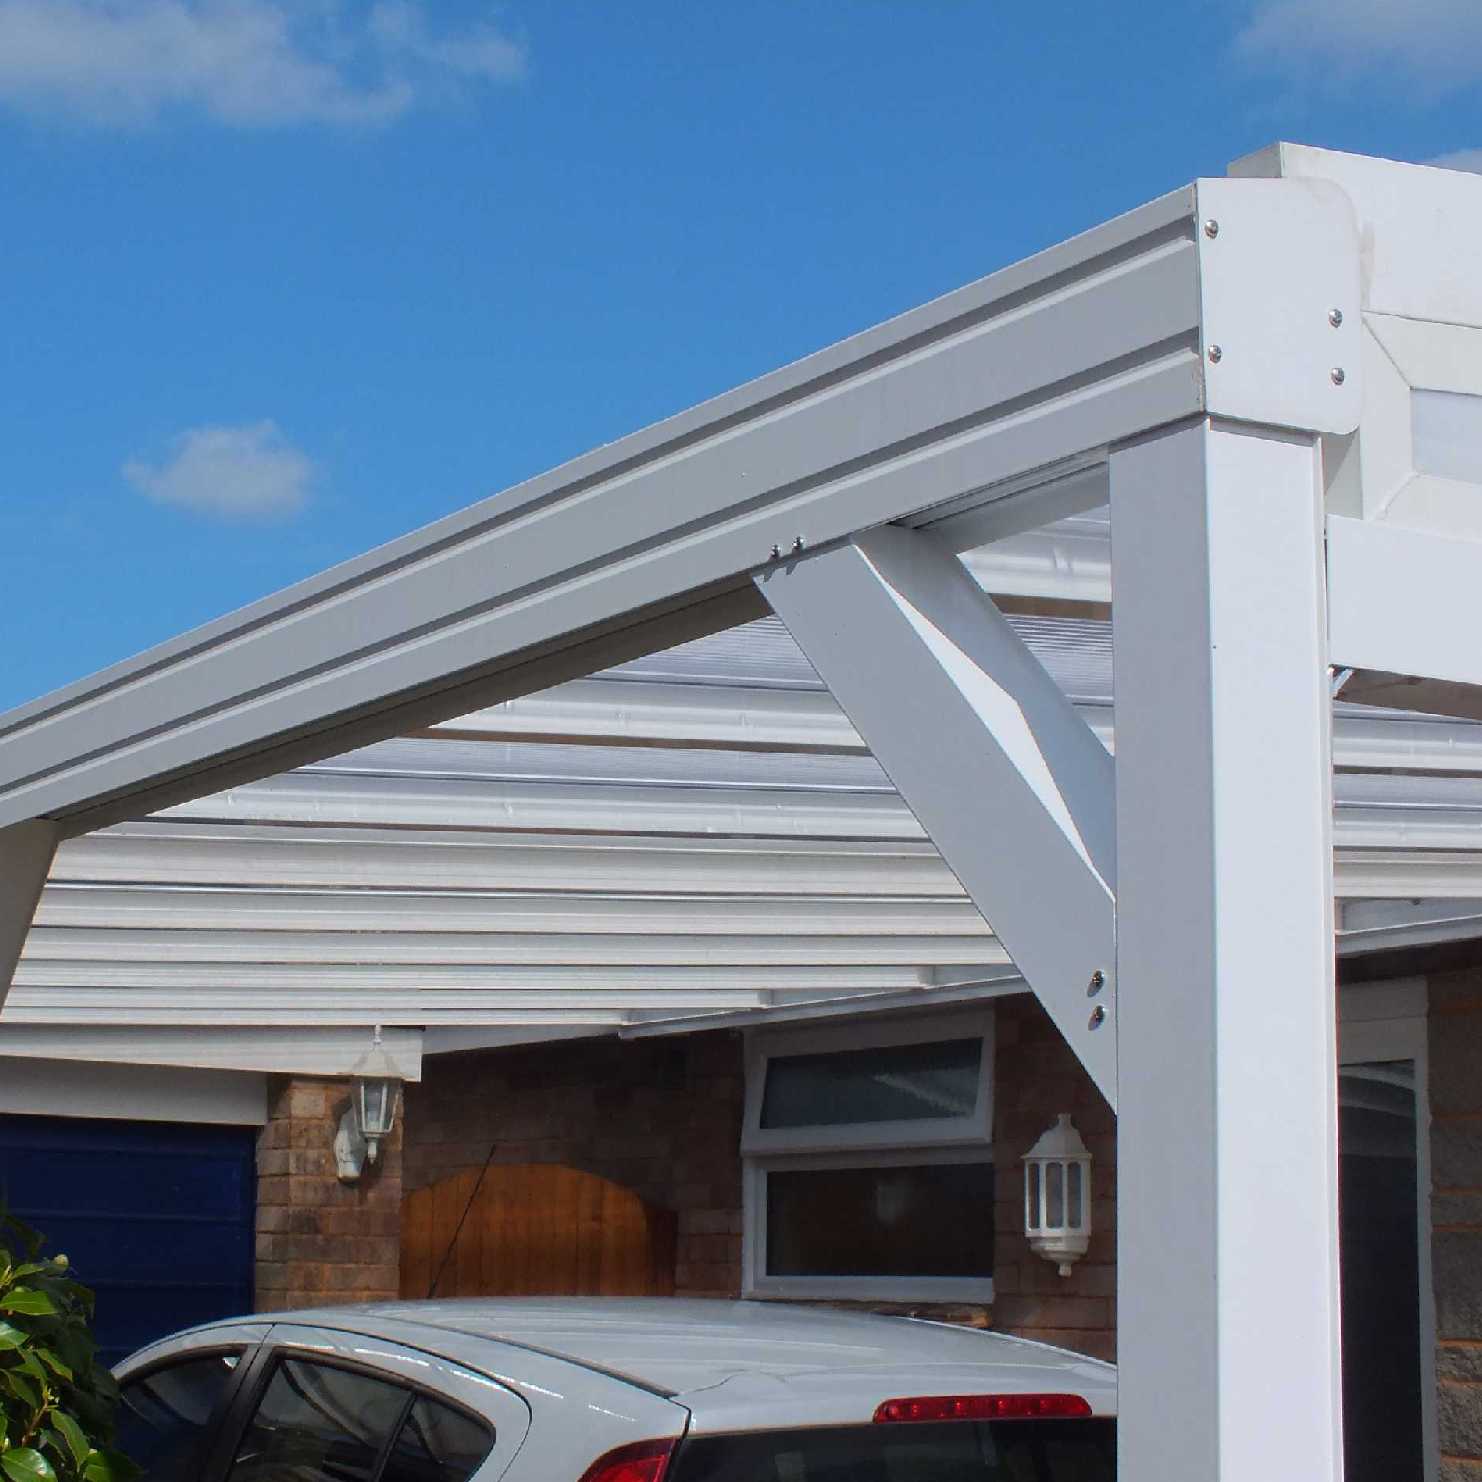 Buy Omega Smart Lean-To Canopy, White with 16mm Polycarbonate Glazing - 11.8m (W) x 4.5m (P), (5) Supporting Posts online today